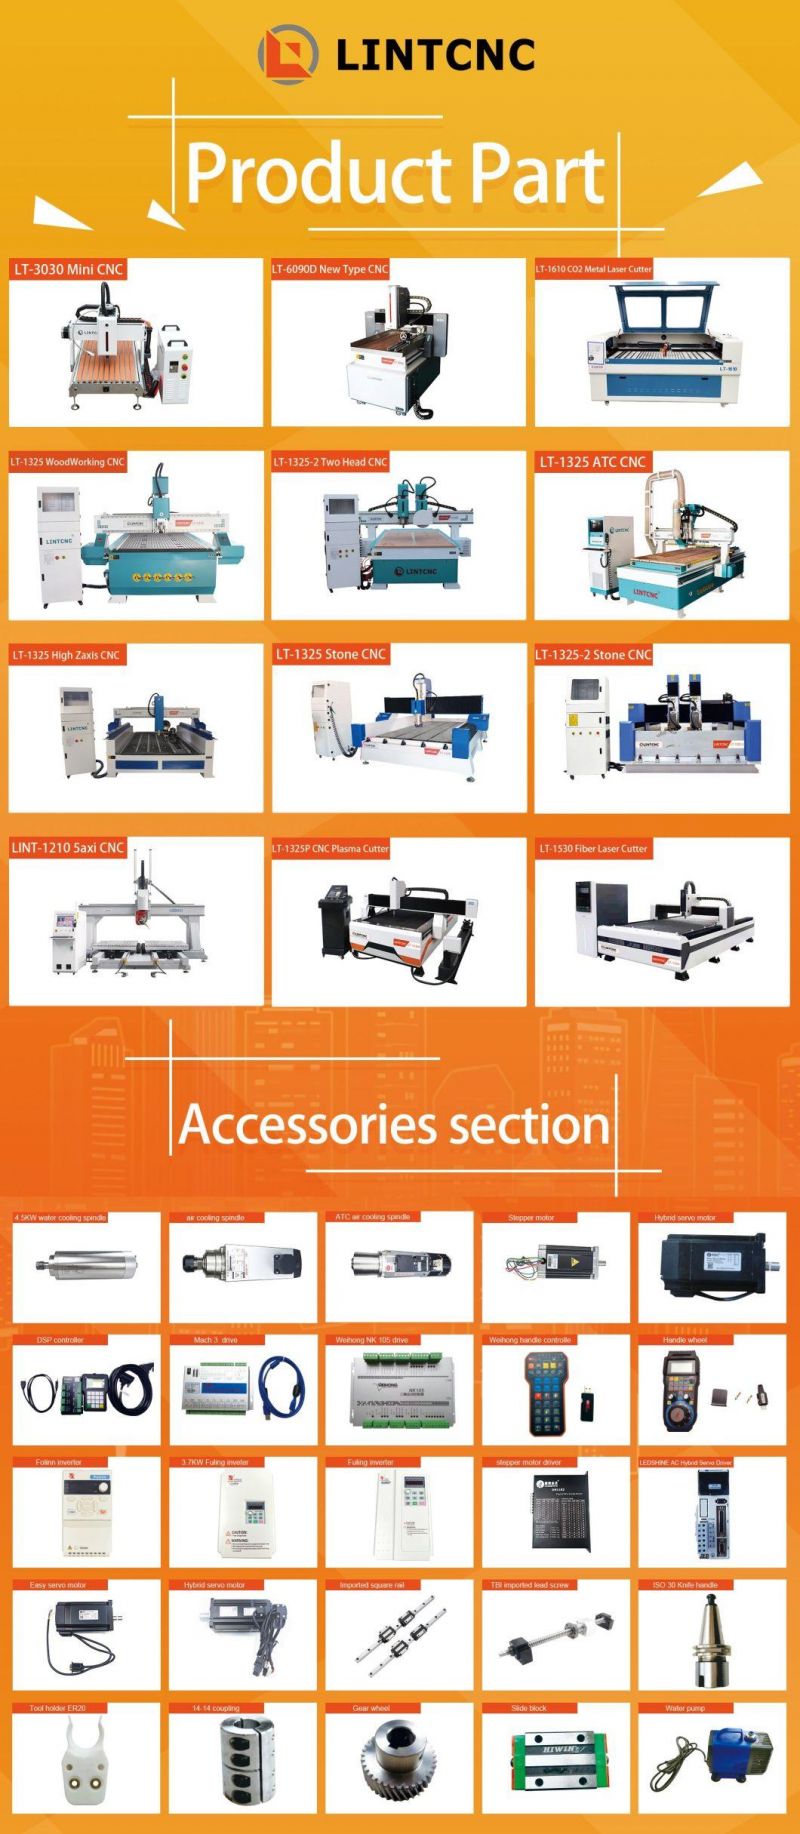 3 Axis 4 Axis CNC Router Machine Woodworking Machinery 3D Wood Carving CNC Router Sculpture Hobby Machine 1300X2500X200mm 1530 1540 2130 3.5kw